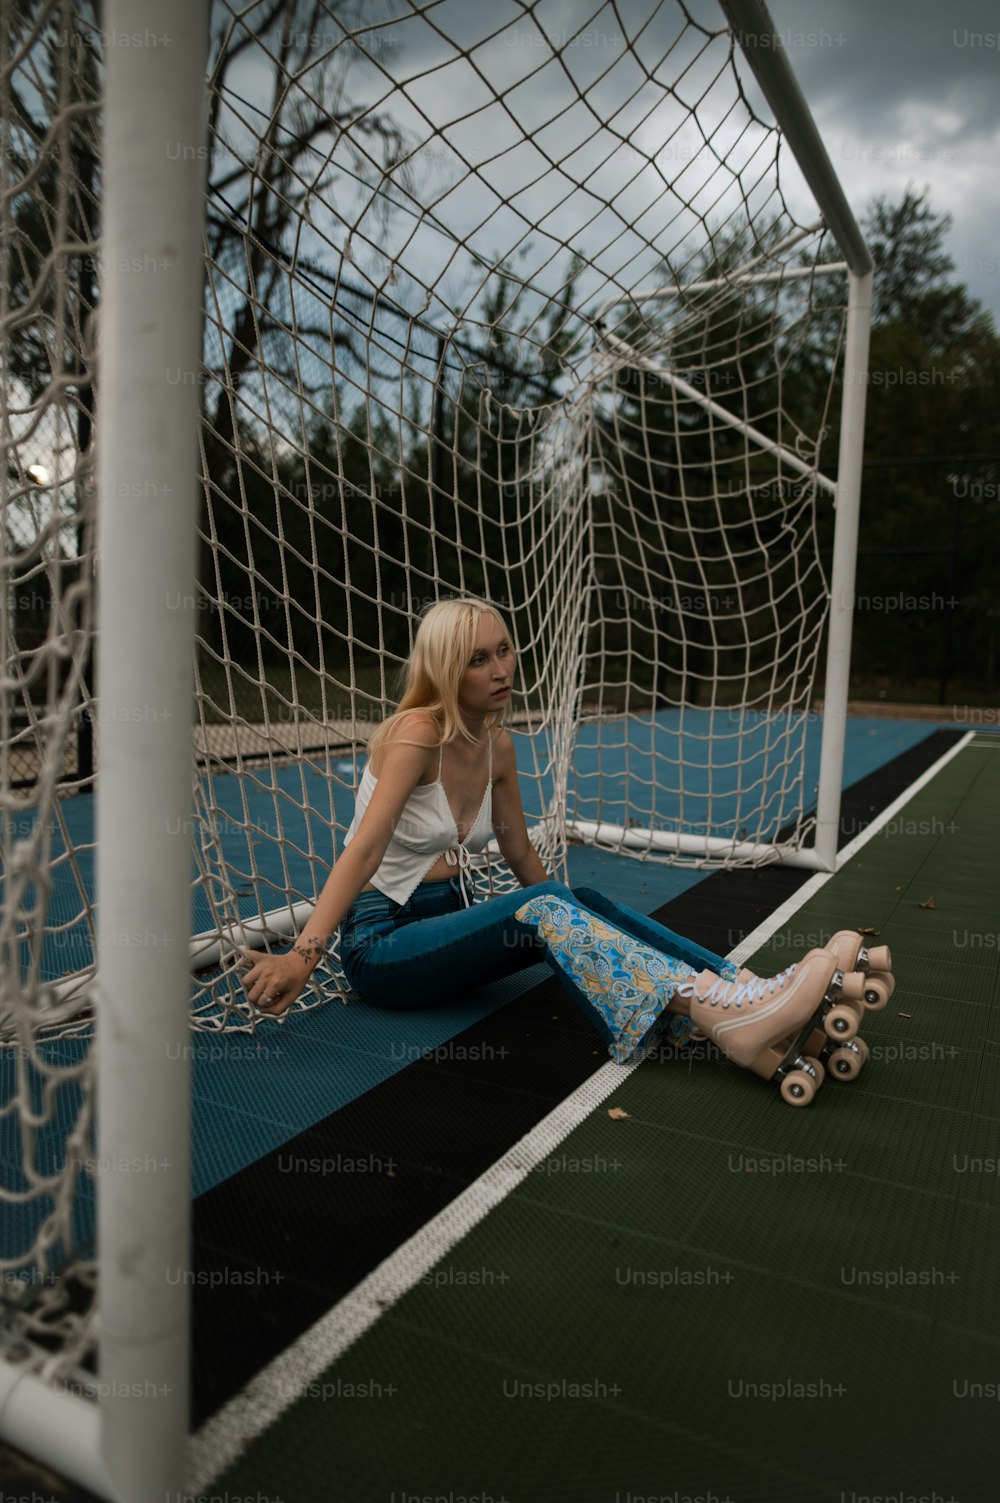 a woman sitting on the ground in front of a soccer goal